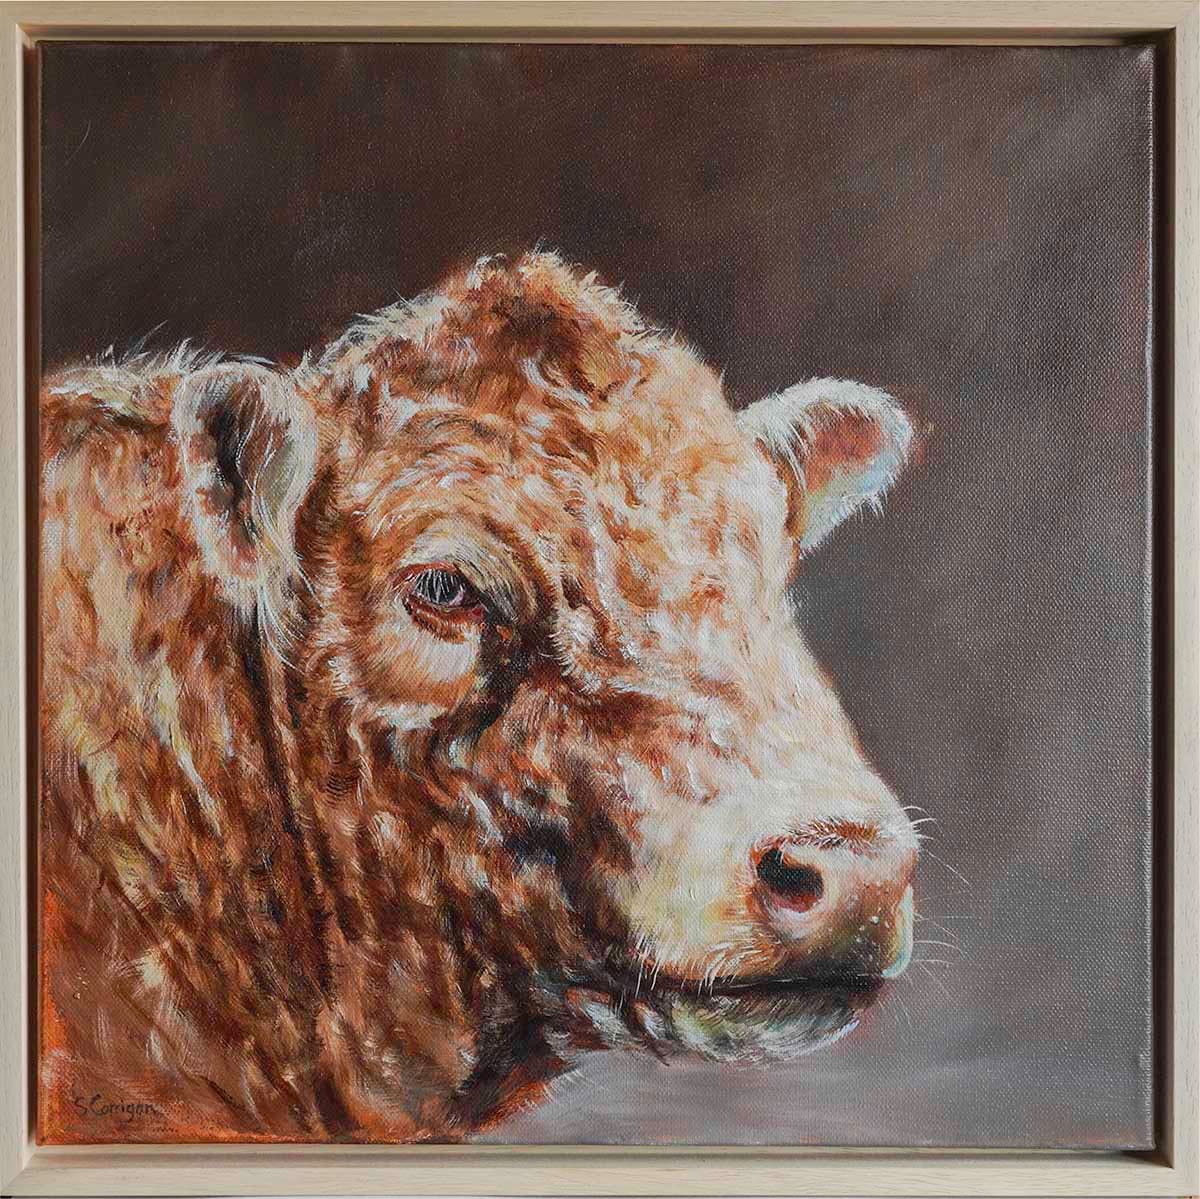 Stare at me by Sarah Corrigan  Image: bull framed 